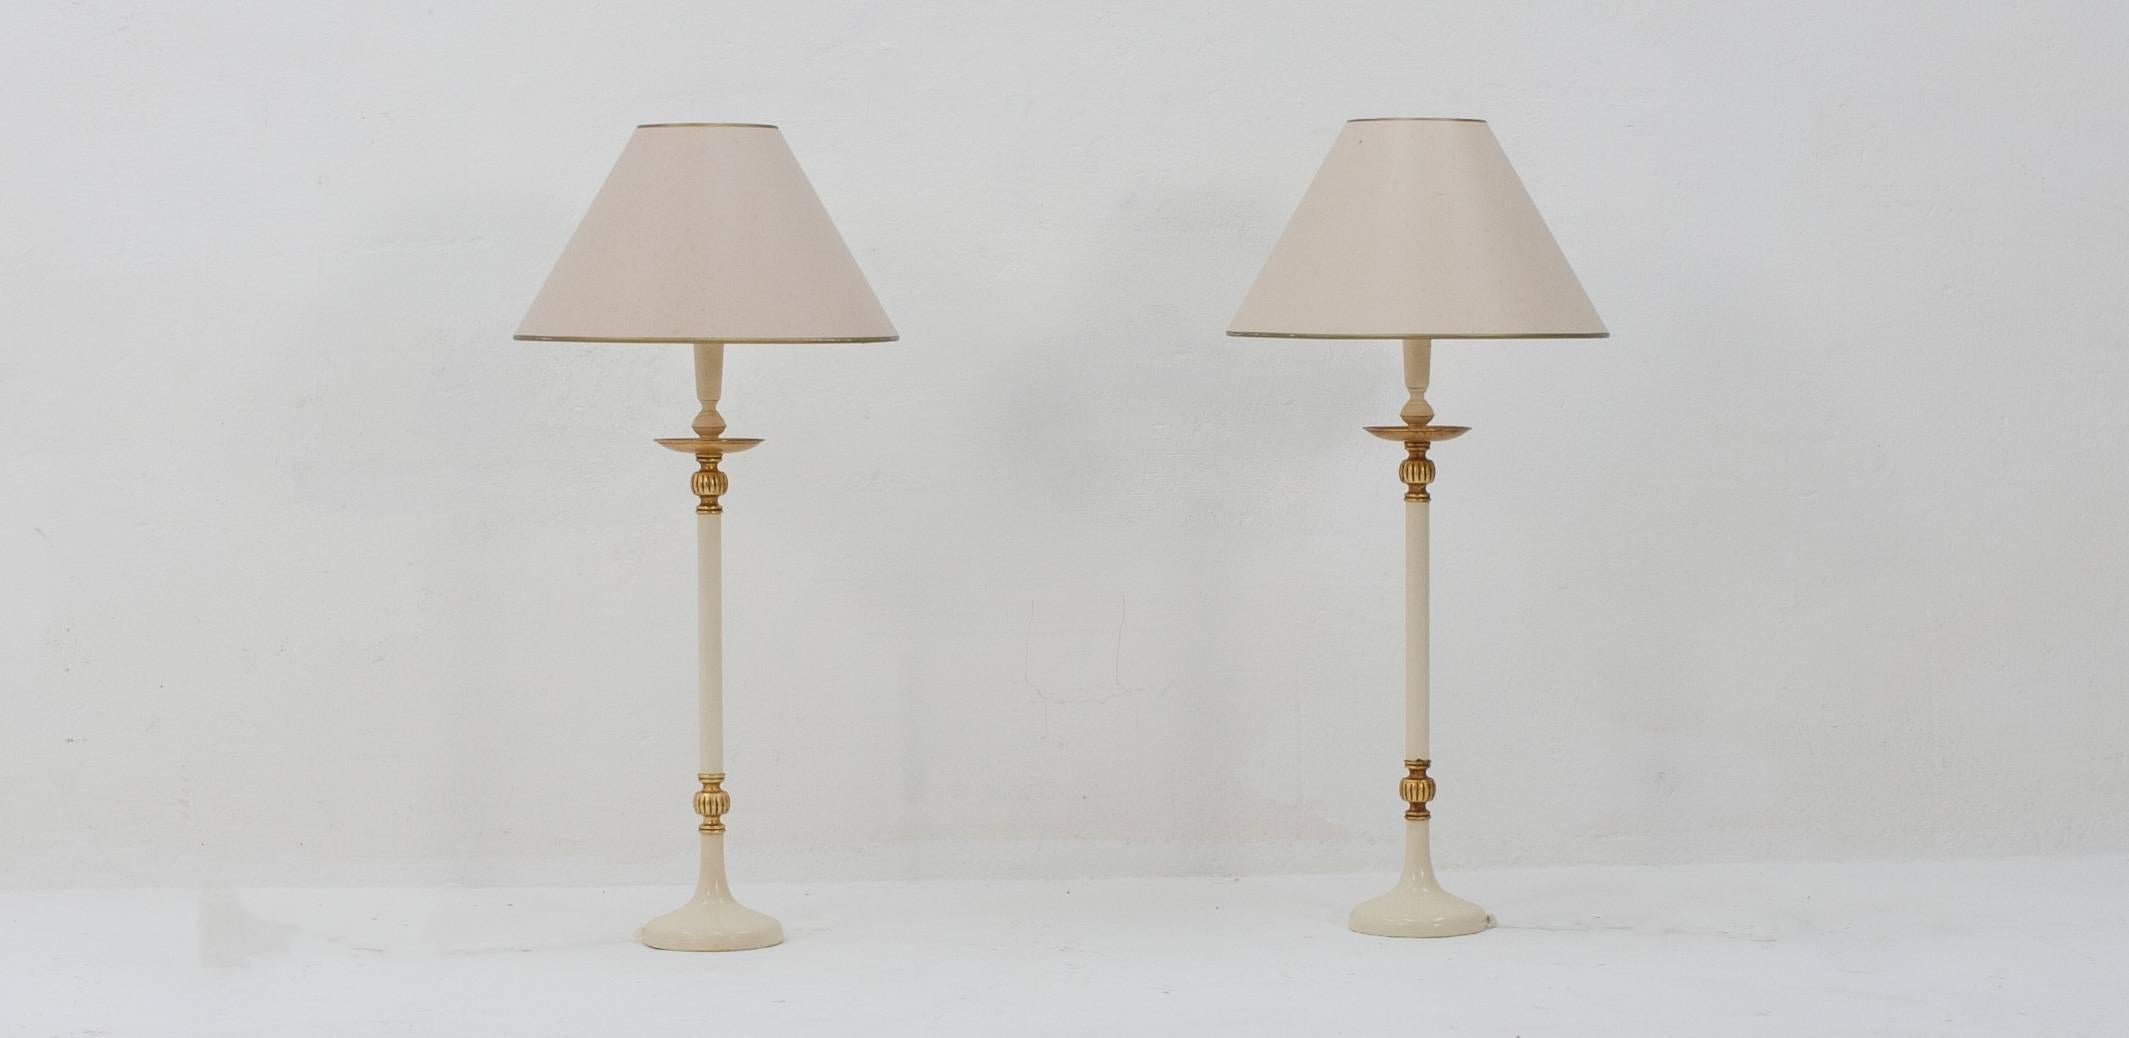 Two classic Hollywood Regency style lamp bases. Nice condition and fully metal construction, made in Italy in the 1970s. We have the lamp shades as well but they're faded unevenly, leaving them slightly different colors.